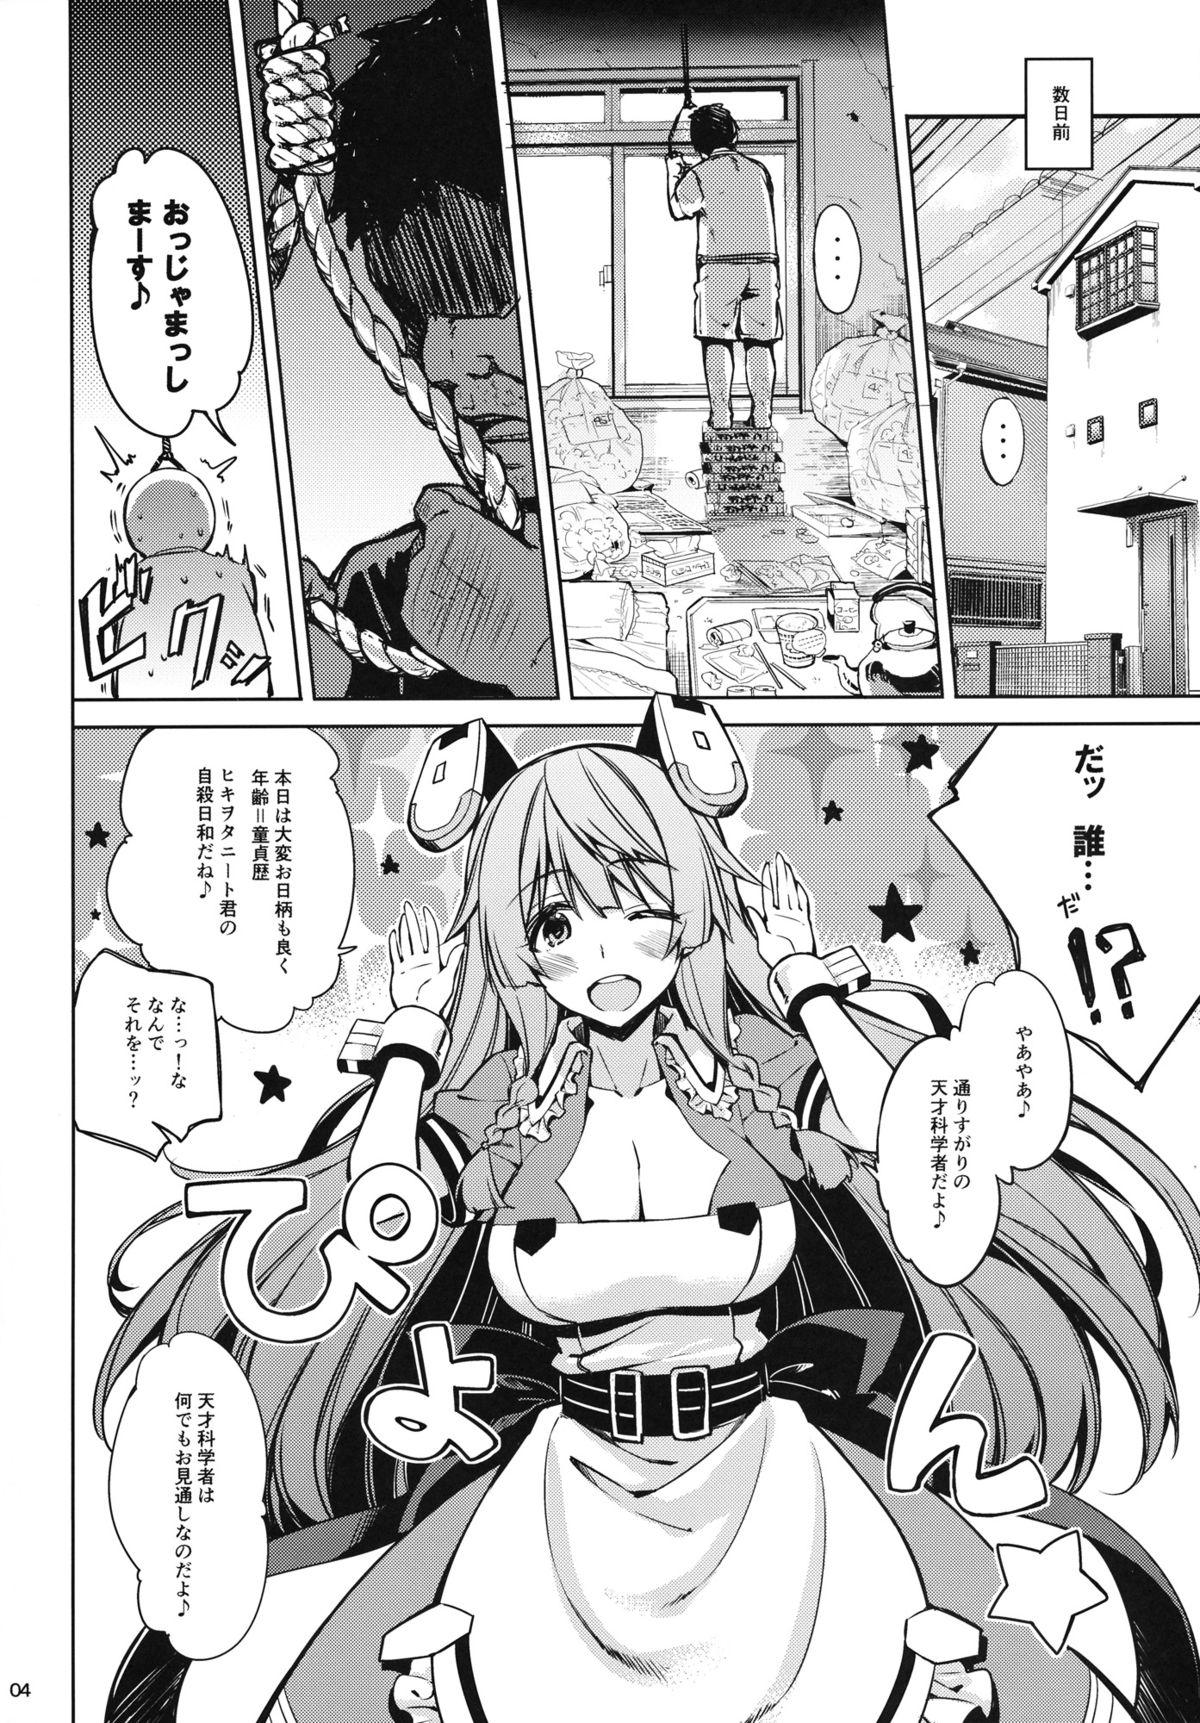 Soapy ONE night SUMMER - Infinite stratos Bang - Page 3